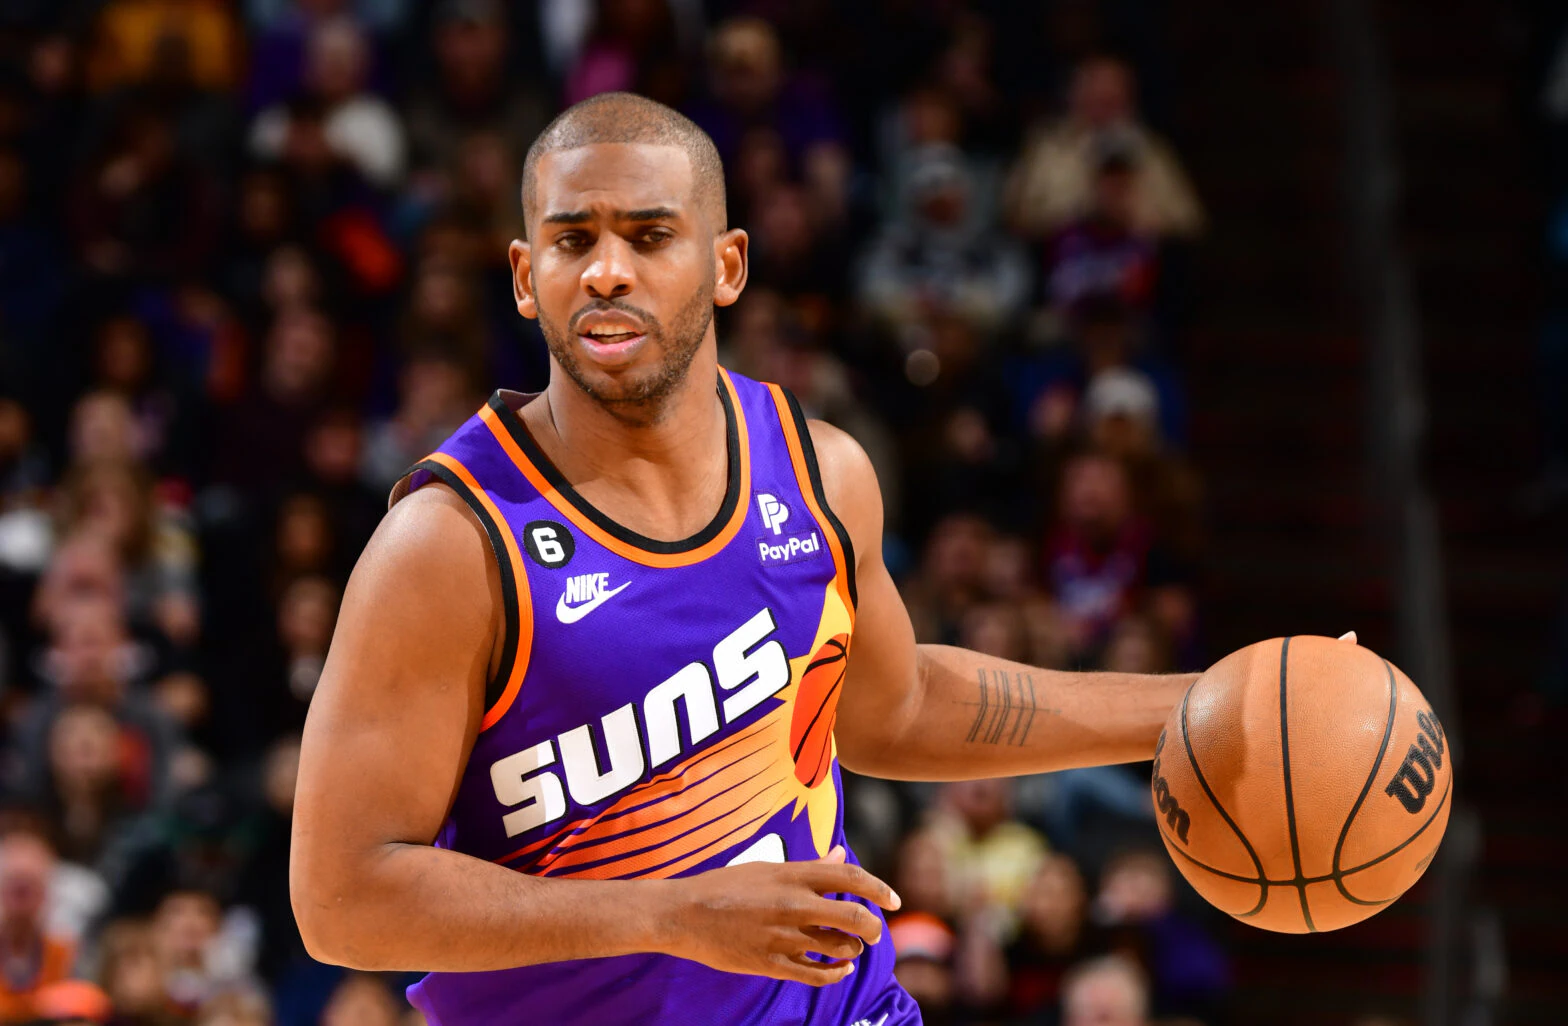 NBA News: Is Chris Paul Playing Tonight vs the Blazers? Warriors Second Unit Point Guard's Availability Up In the Air